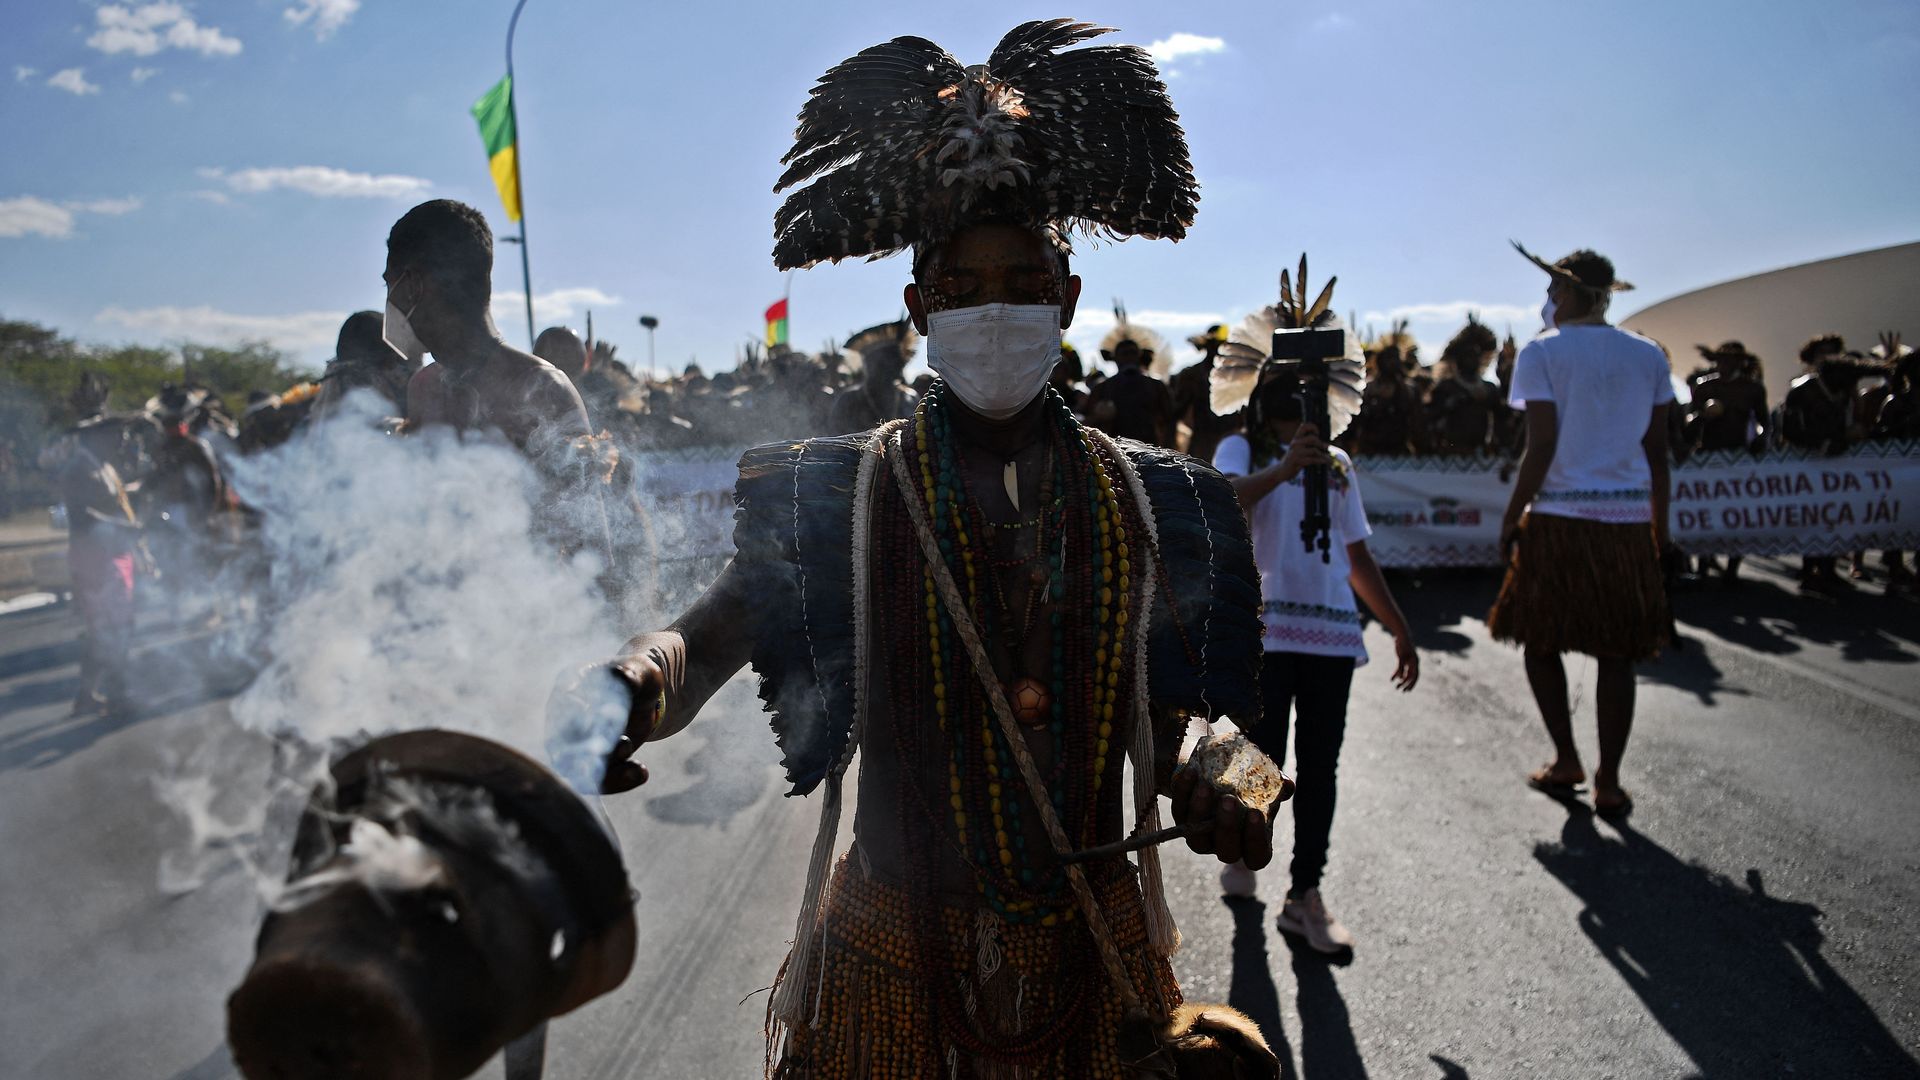 Photo of an Indigenous person burning incense and leading a crowd of protesters